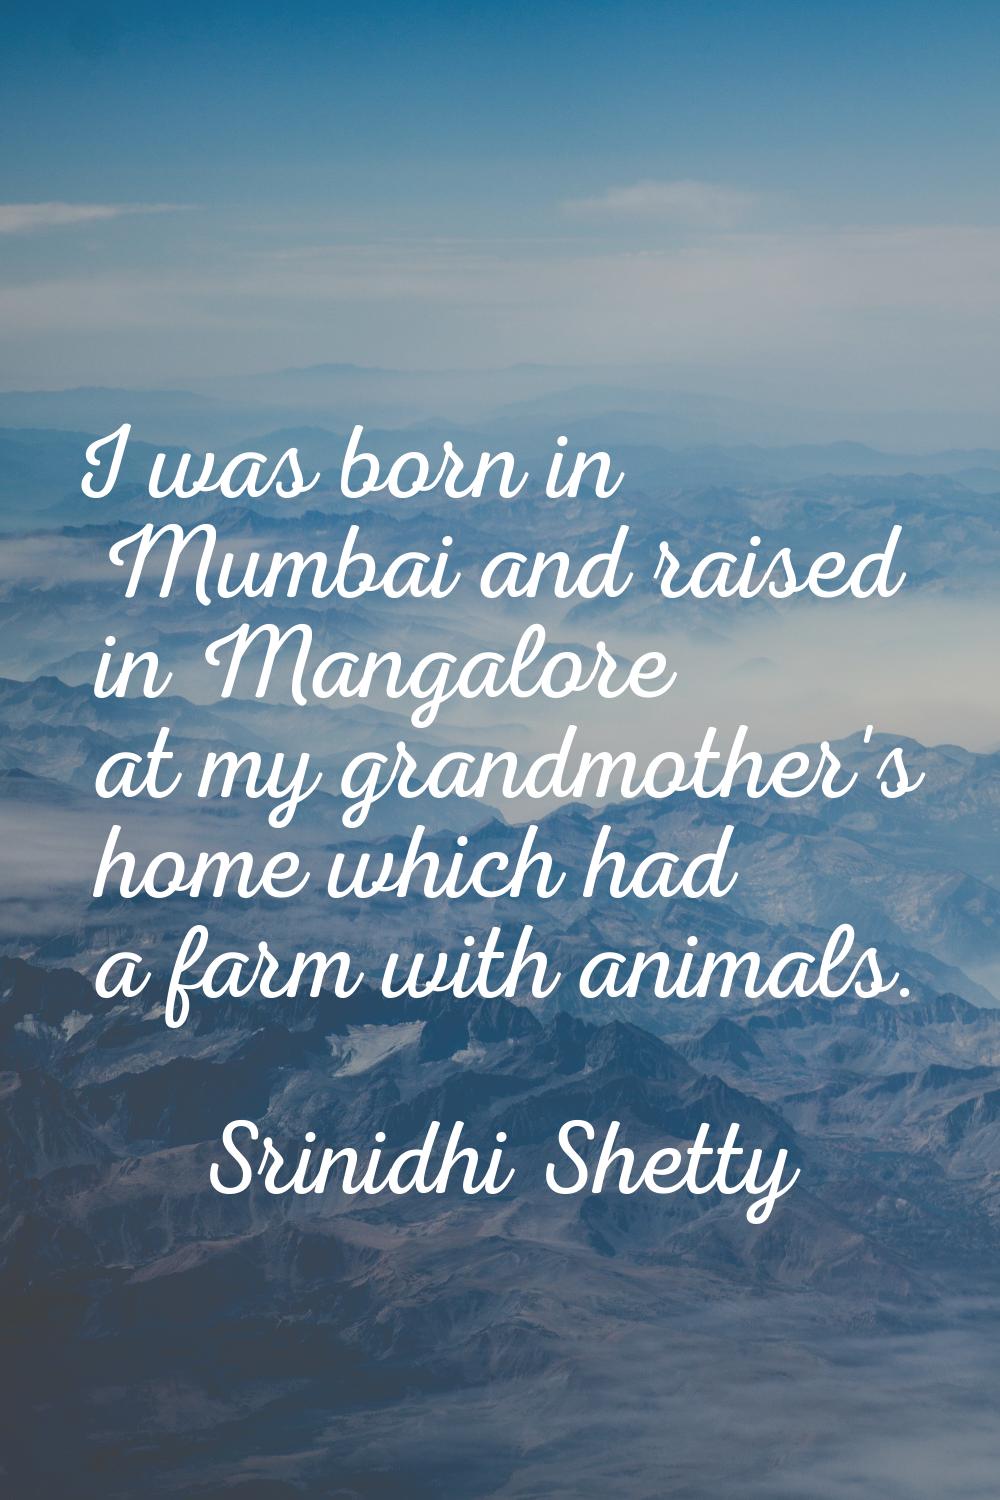 I was born in Mumbai and raised in Mangalore at my grandmother's home which had a farm with animals